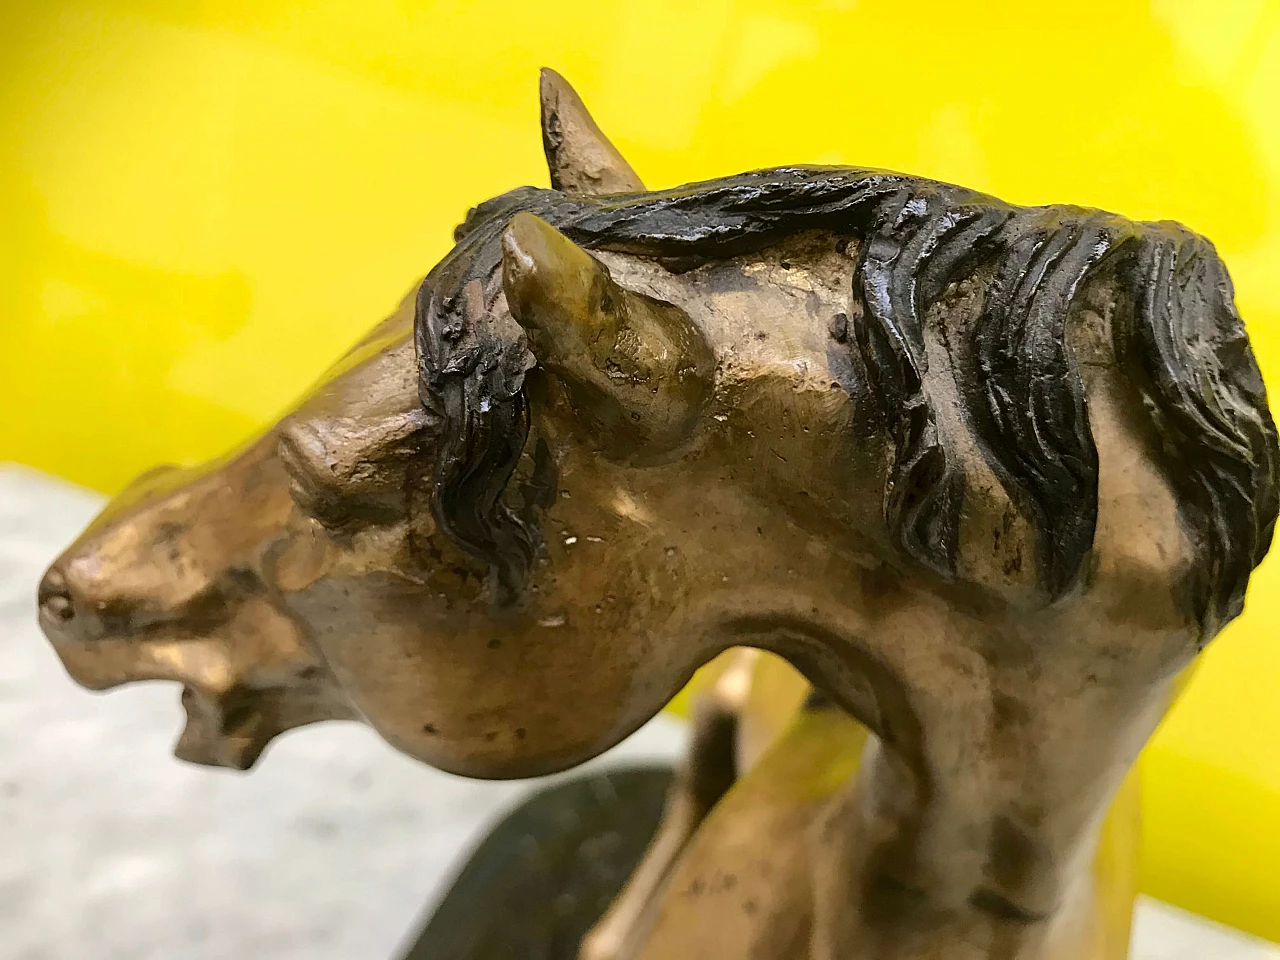 P.J.Mêne, gilded and burnished bronze sculpture of a "Horse" with black marble base, original 19th century 1177737